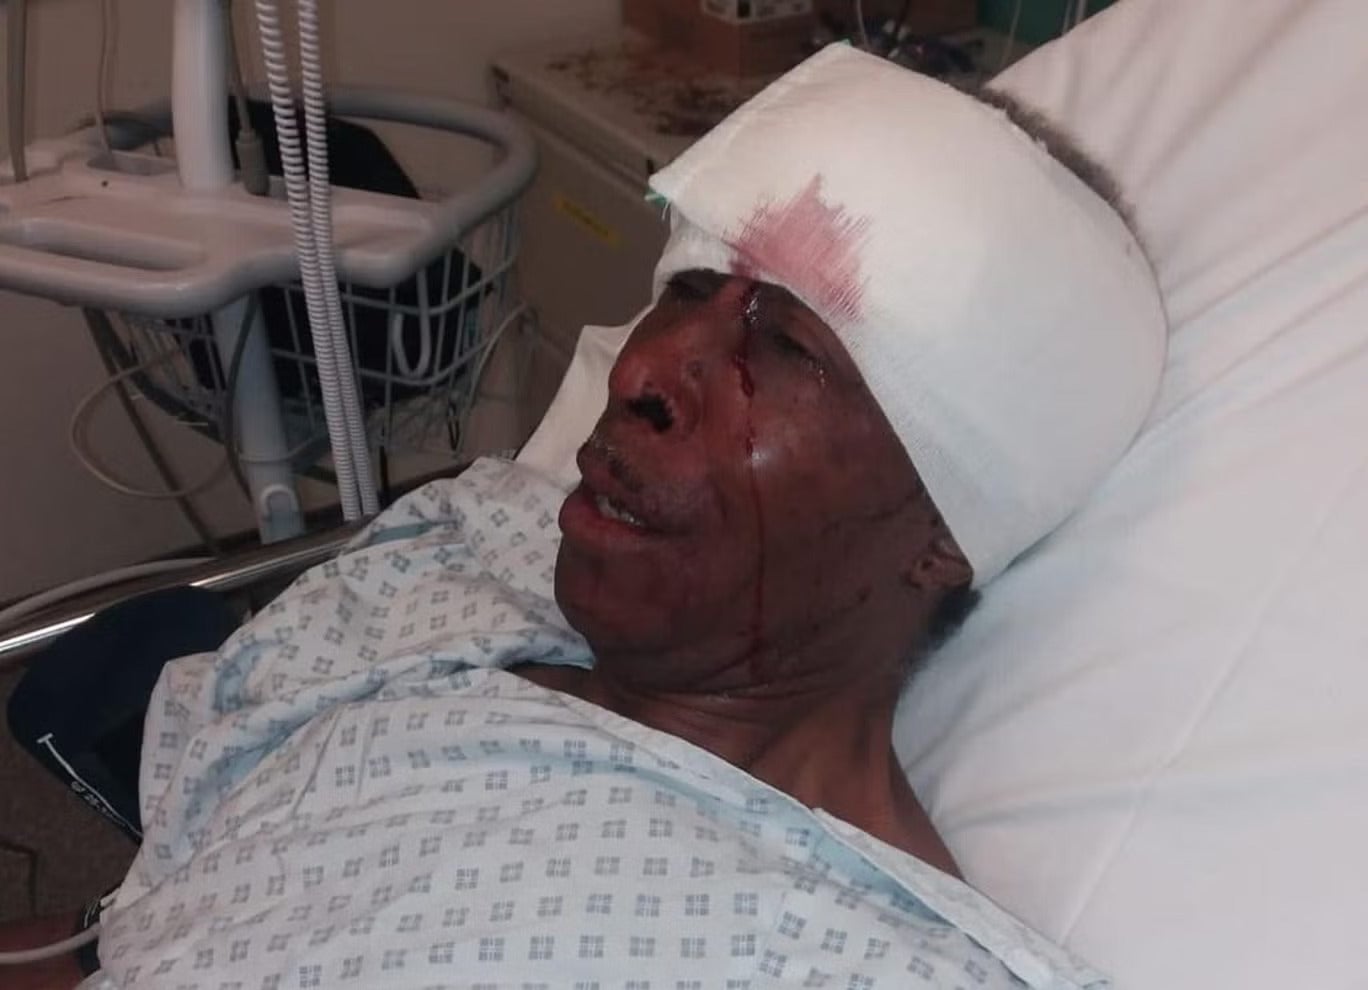 Errol Dixon was hospitalised as a result of injuries suffered during a police stop